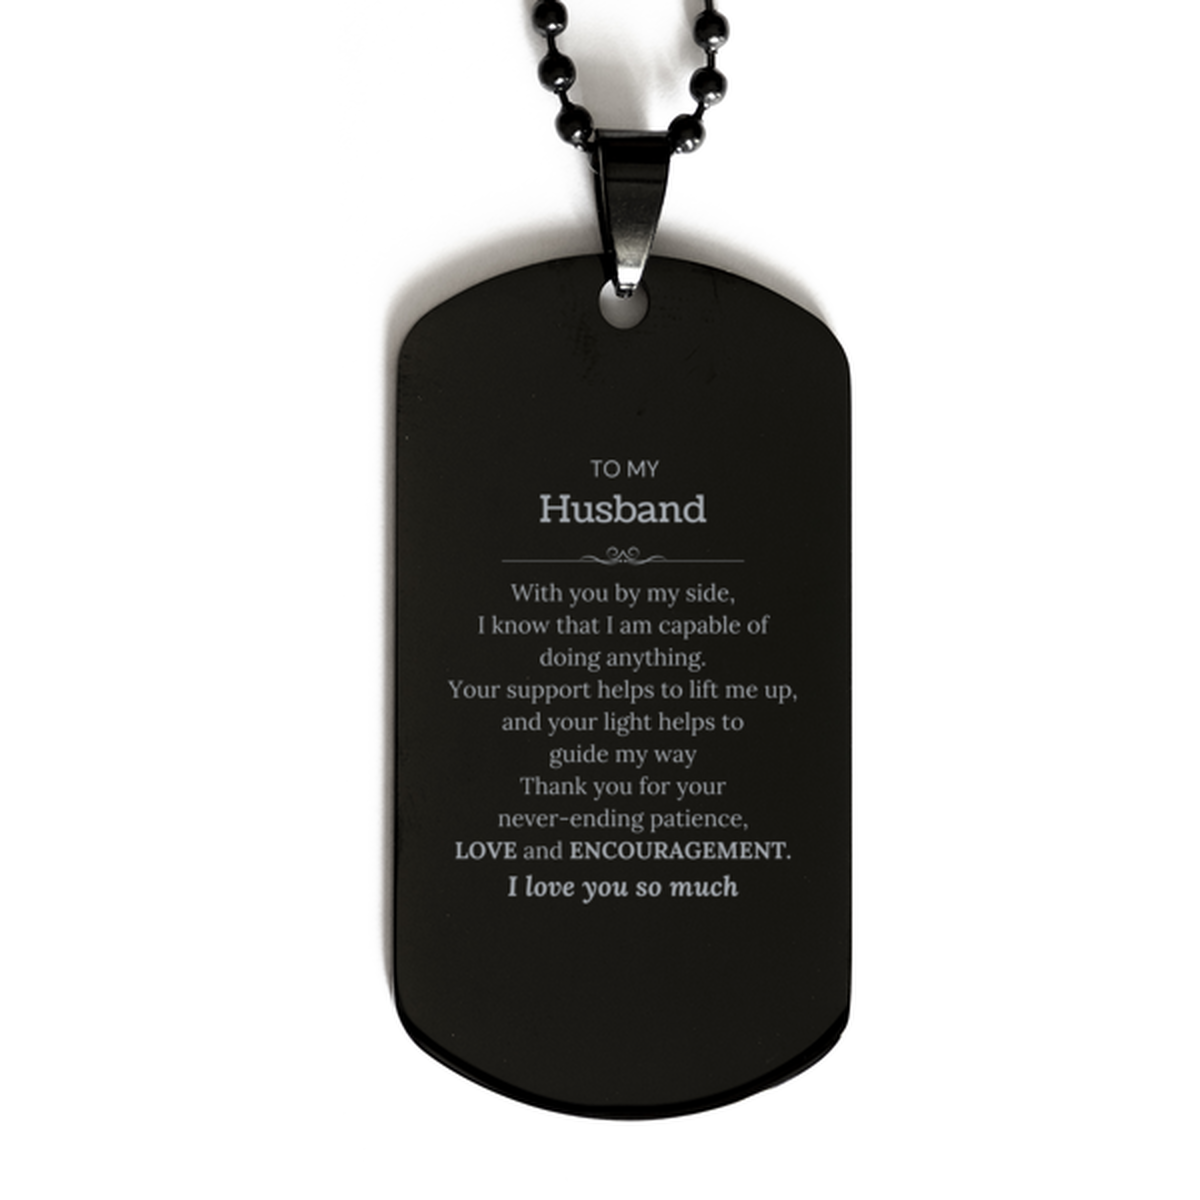 Appreciation Husband Black Dog Tag Gifts, To My Husband Birthday Christmas Wedding Keepsake Gifts for Husband With you by my side, I know that I am capable of doing anything. I love you so much